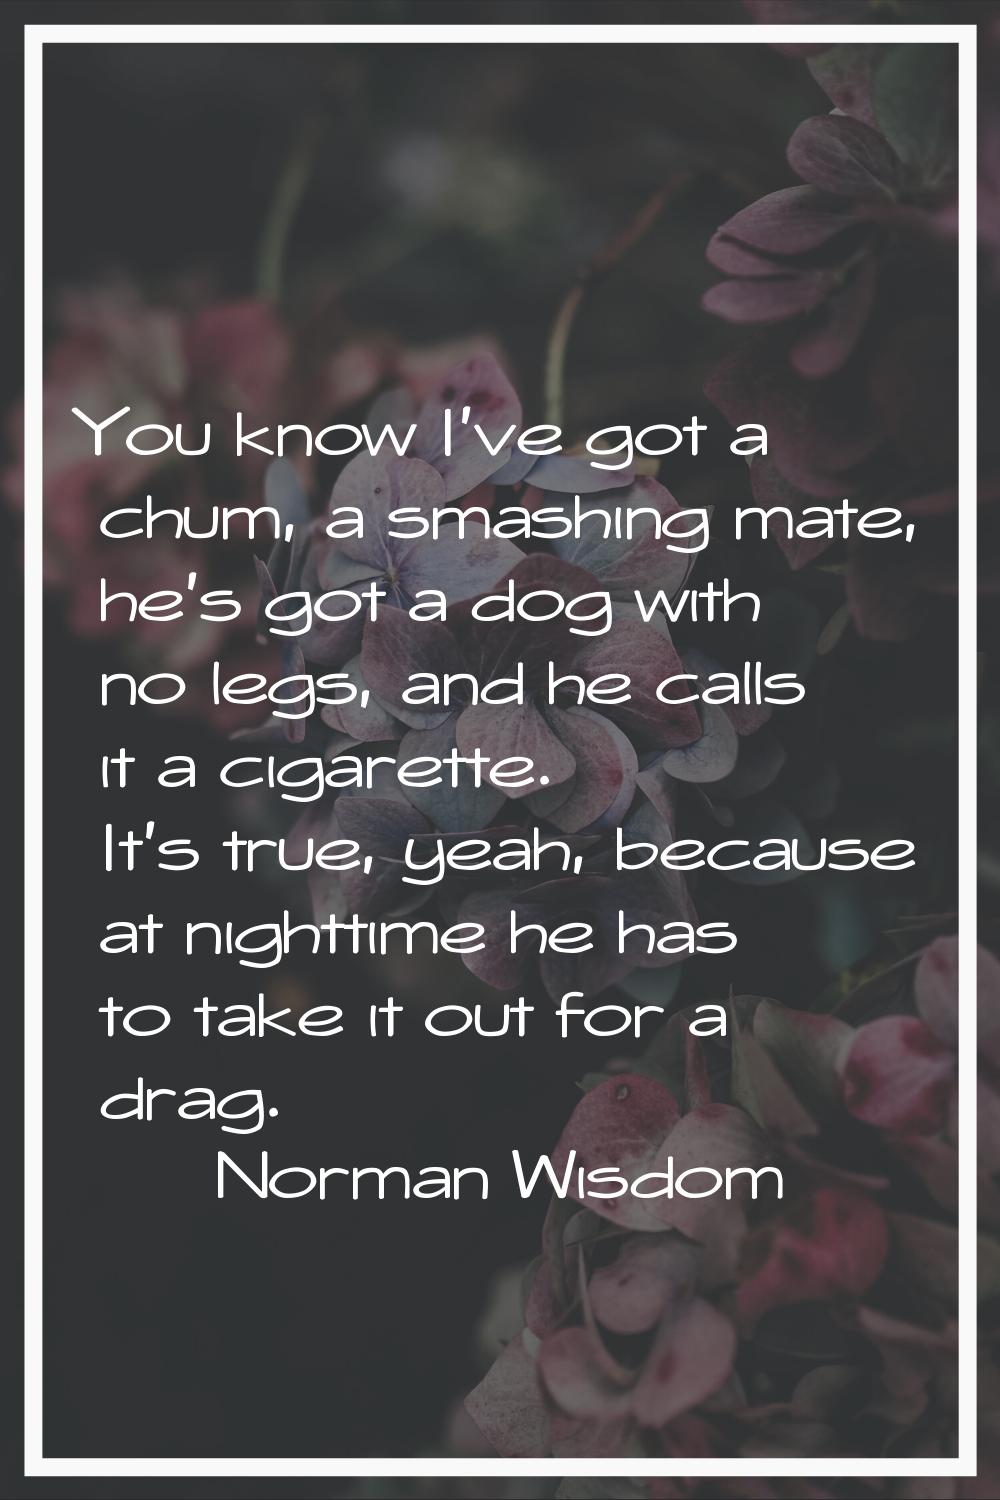 You know I've got a chum, a smashing mate, he's got a dog with no legs, and he calls it a cigarette